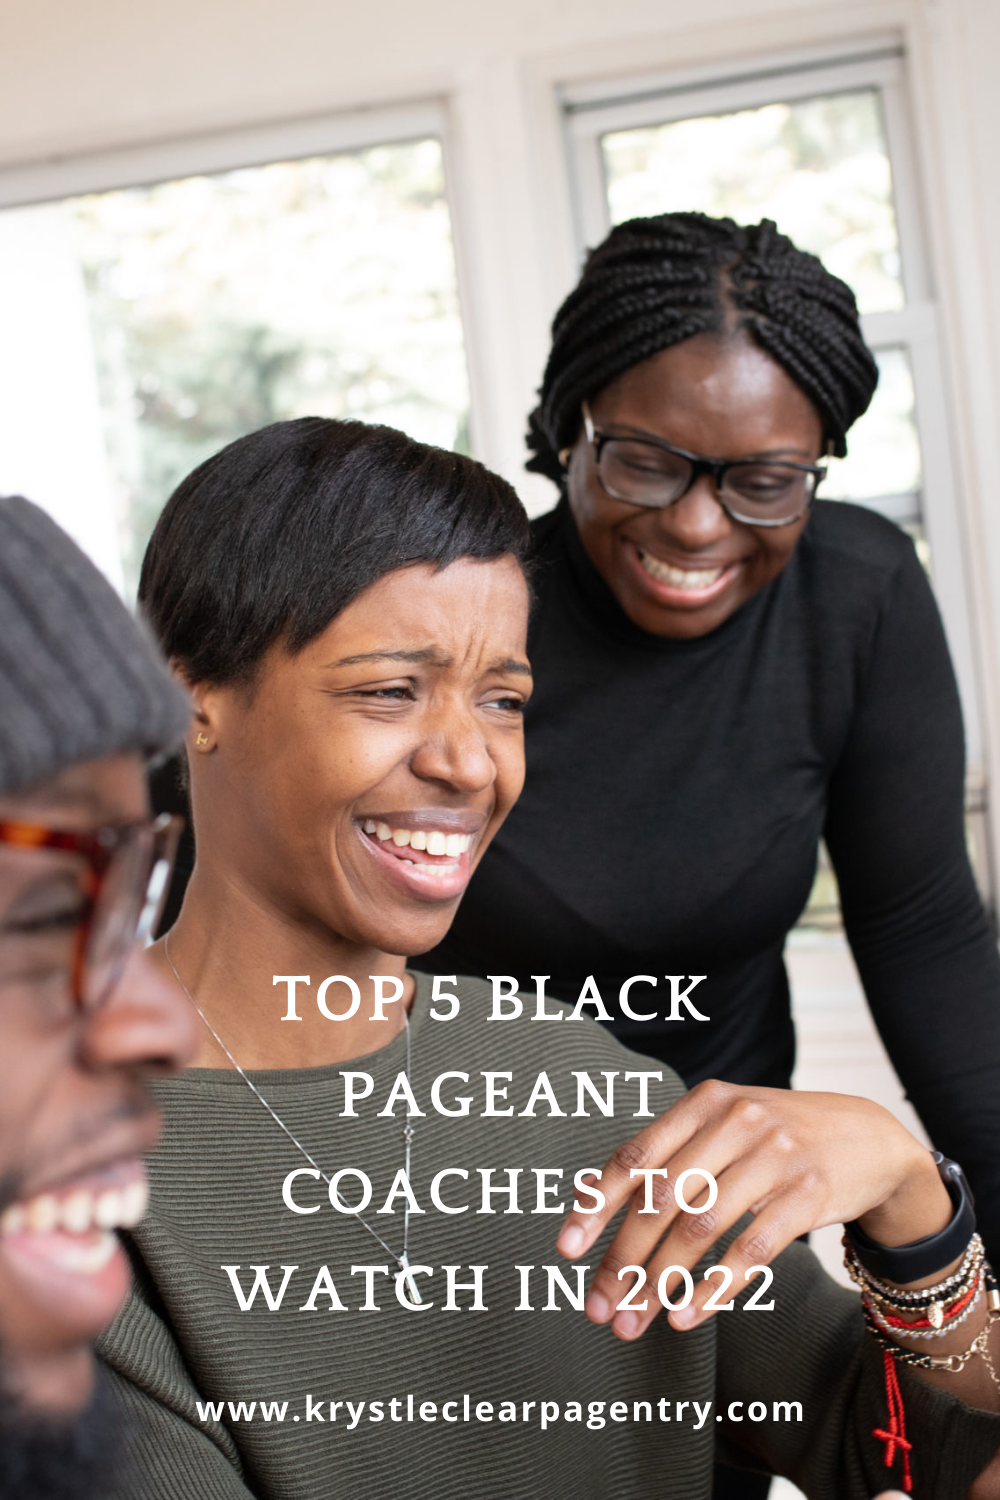 Top 5 Black Pageant Coaches to Watch in 2022